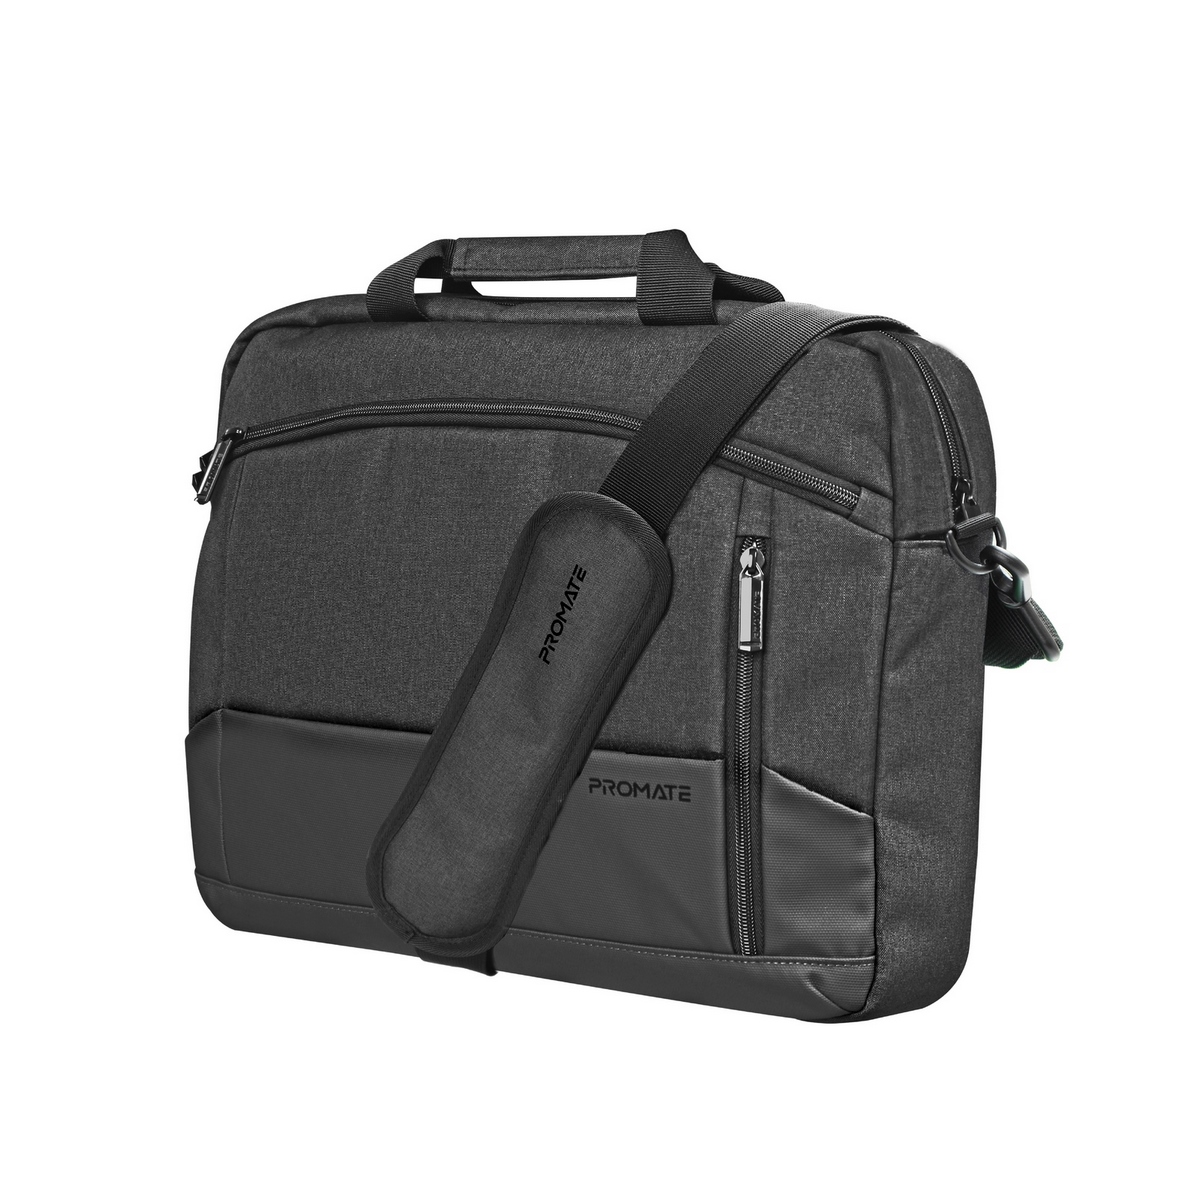 Promate Messenger Bag, Lightweight 15.6-inch Laptop Bag with Secure Zippers, Water-Resistance, Luggage Belt, Front Pocket and Multiple Compartments for MacBook Air, iPad Air, Dell XPS 15, Satchel-MB.BLACK